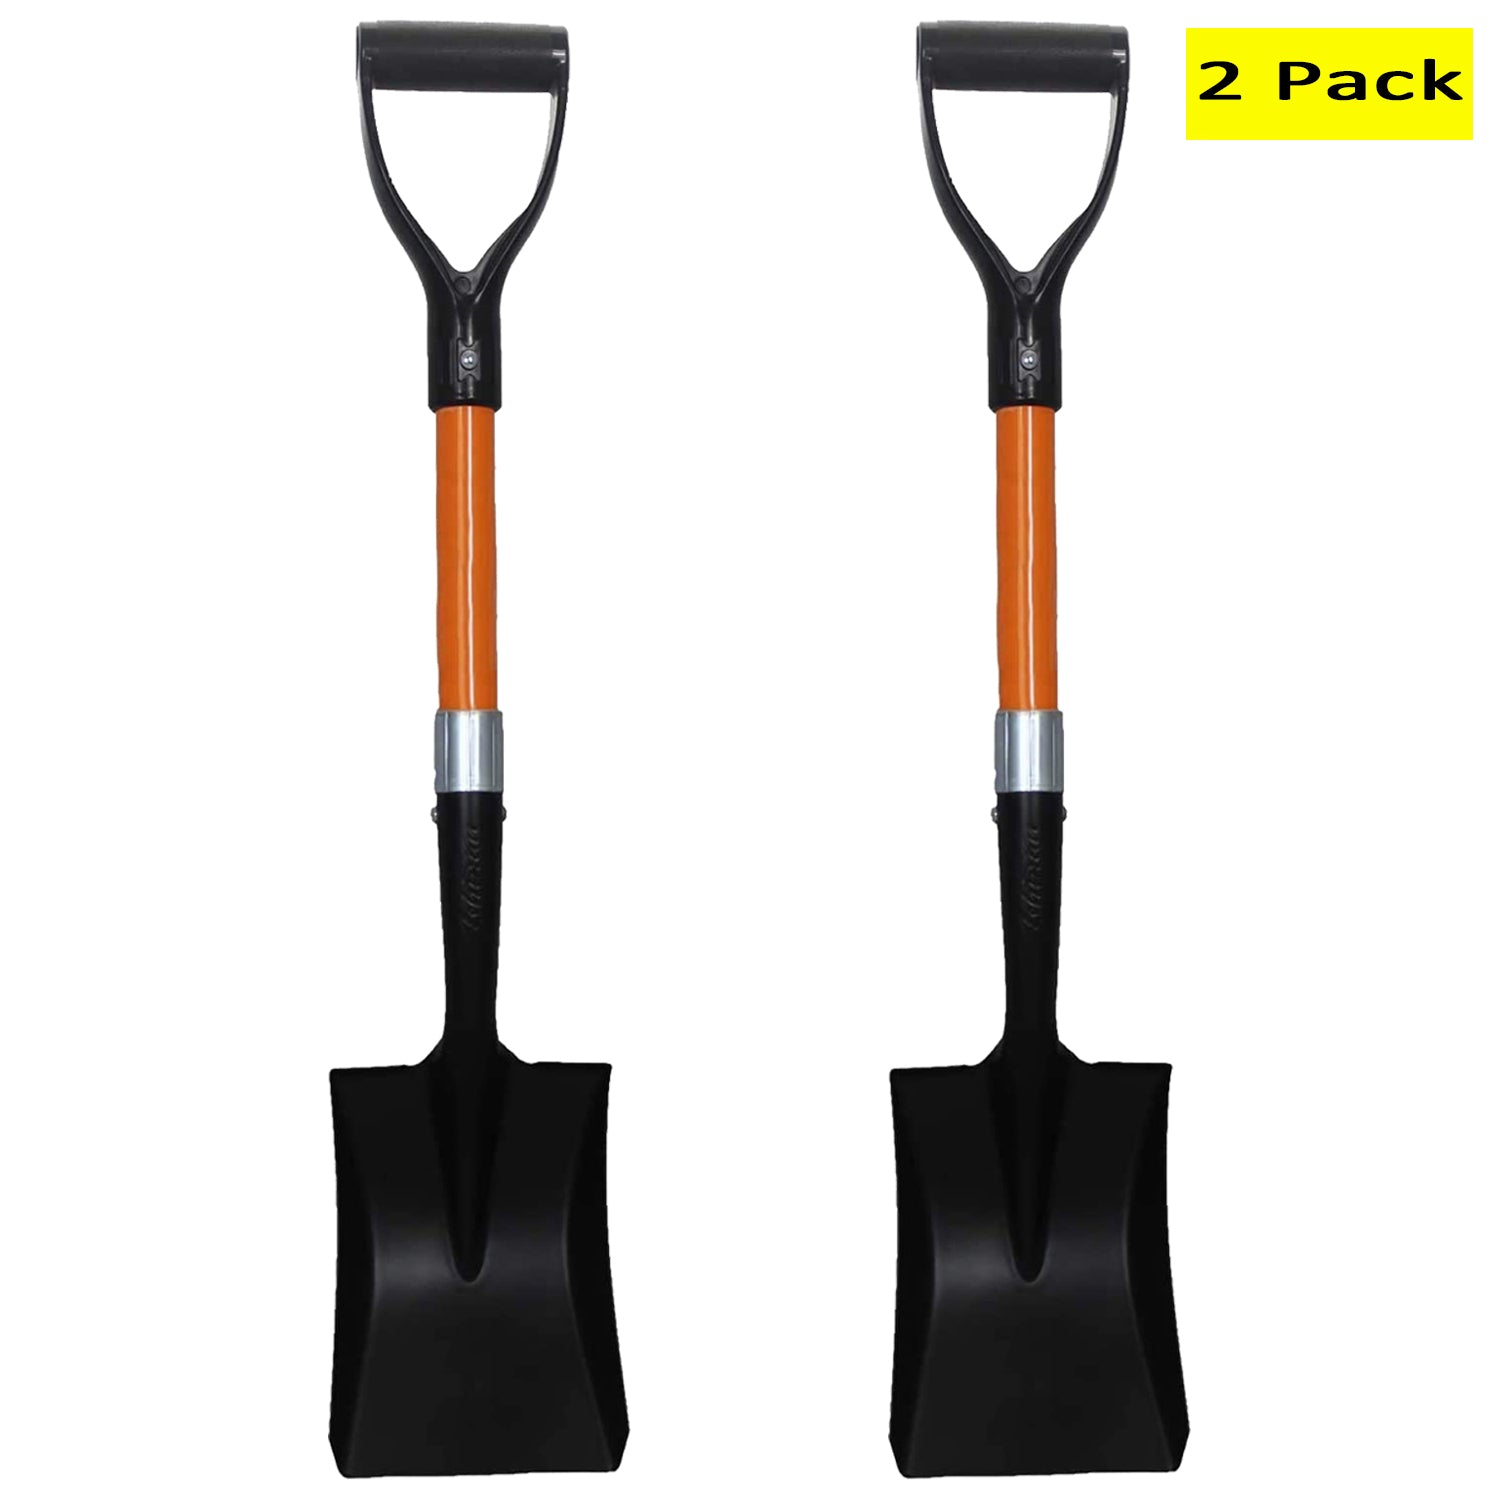 Shovel Purpose And Possible Uses!